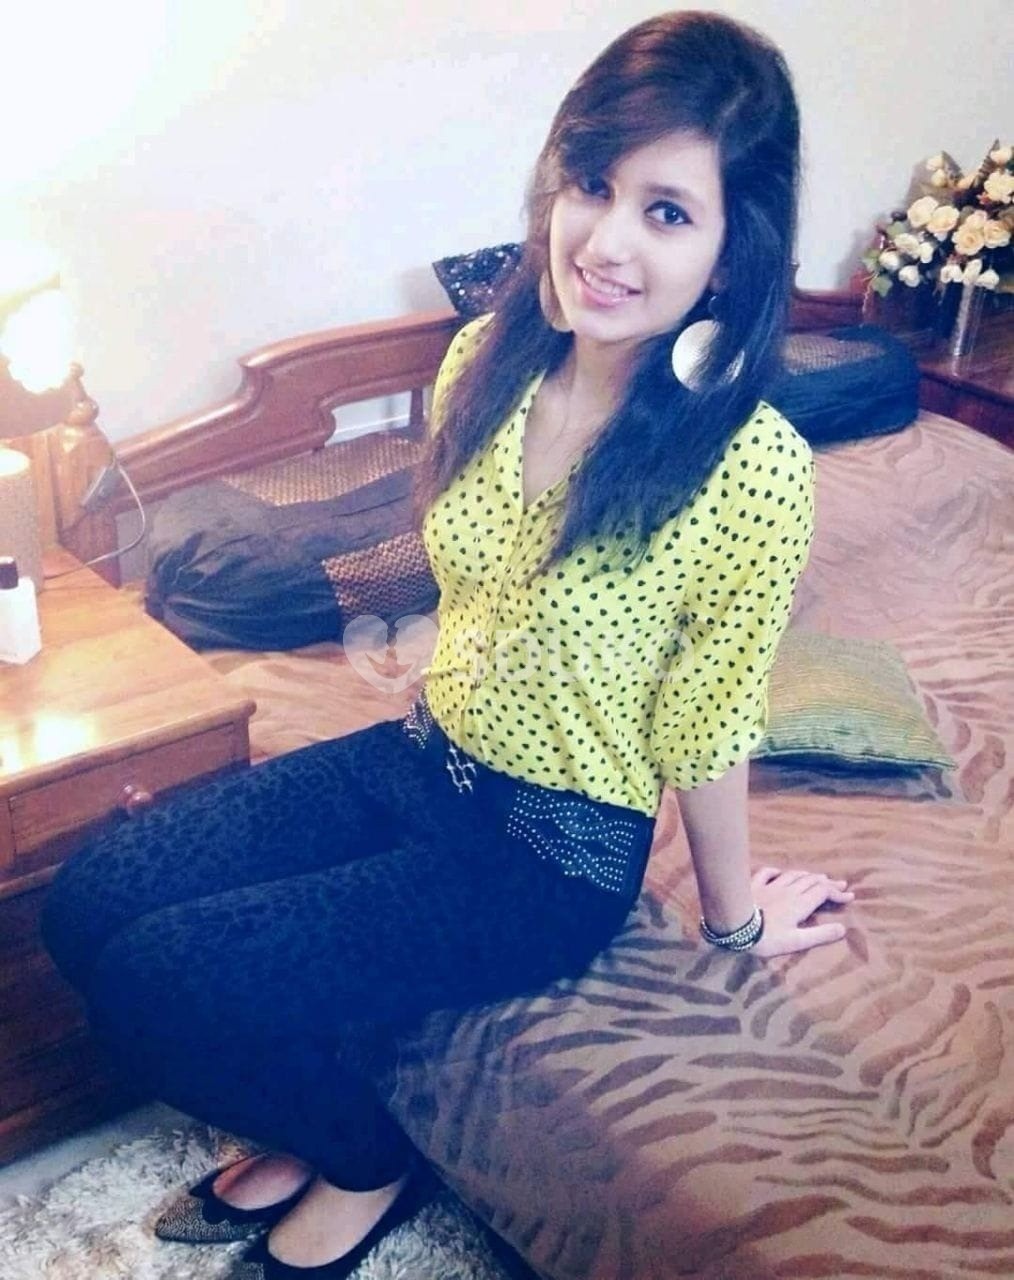 Call girl in Hyderabad self and secure high profile girl available now...